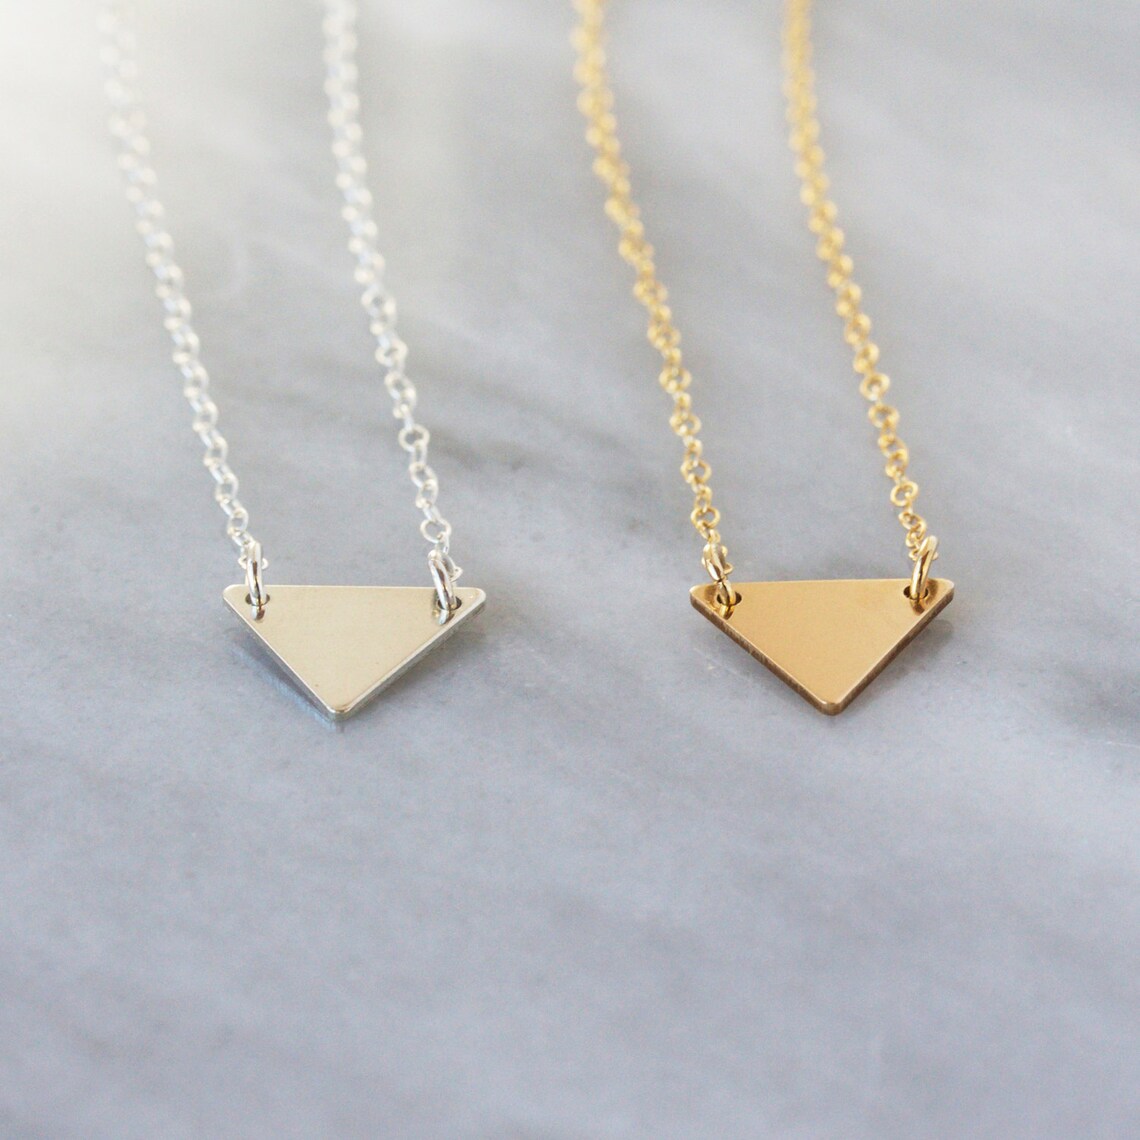 Small Triangle Necklace Sterling Silver or 14k Gold Filled - Etsy